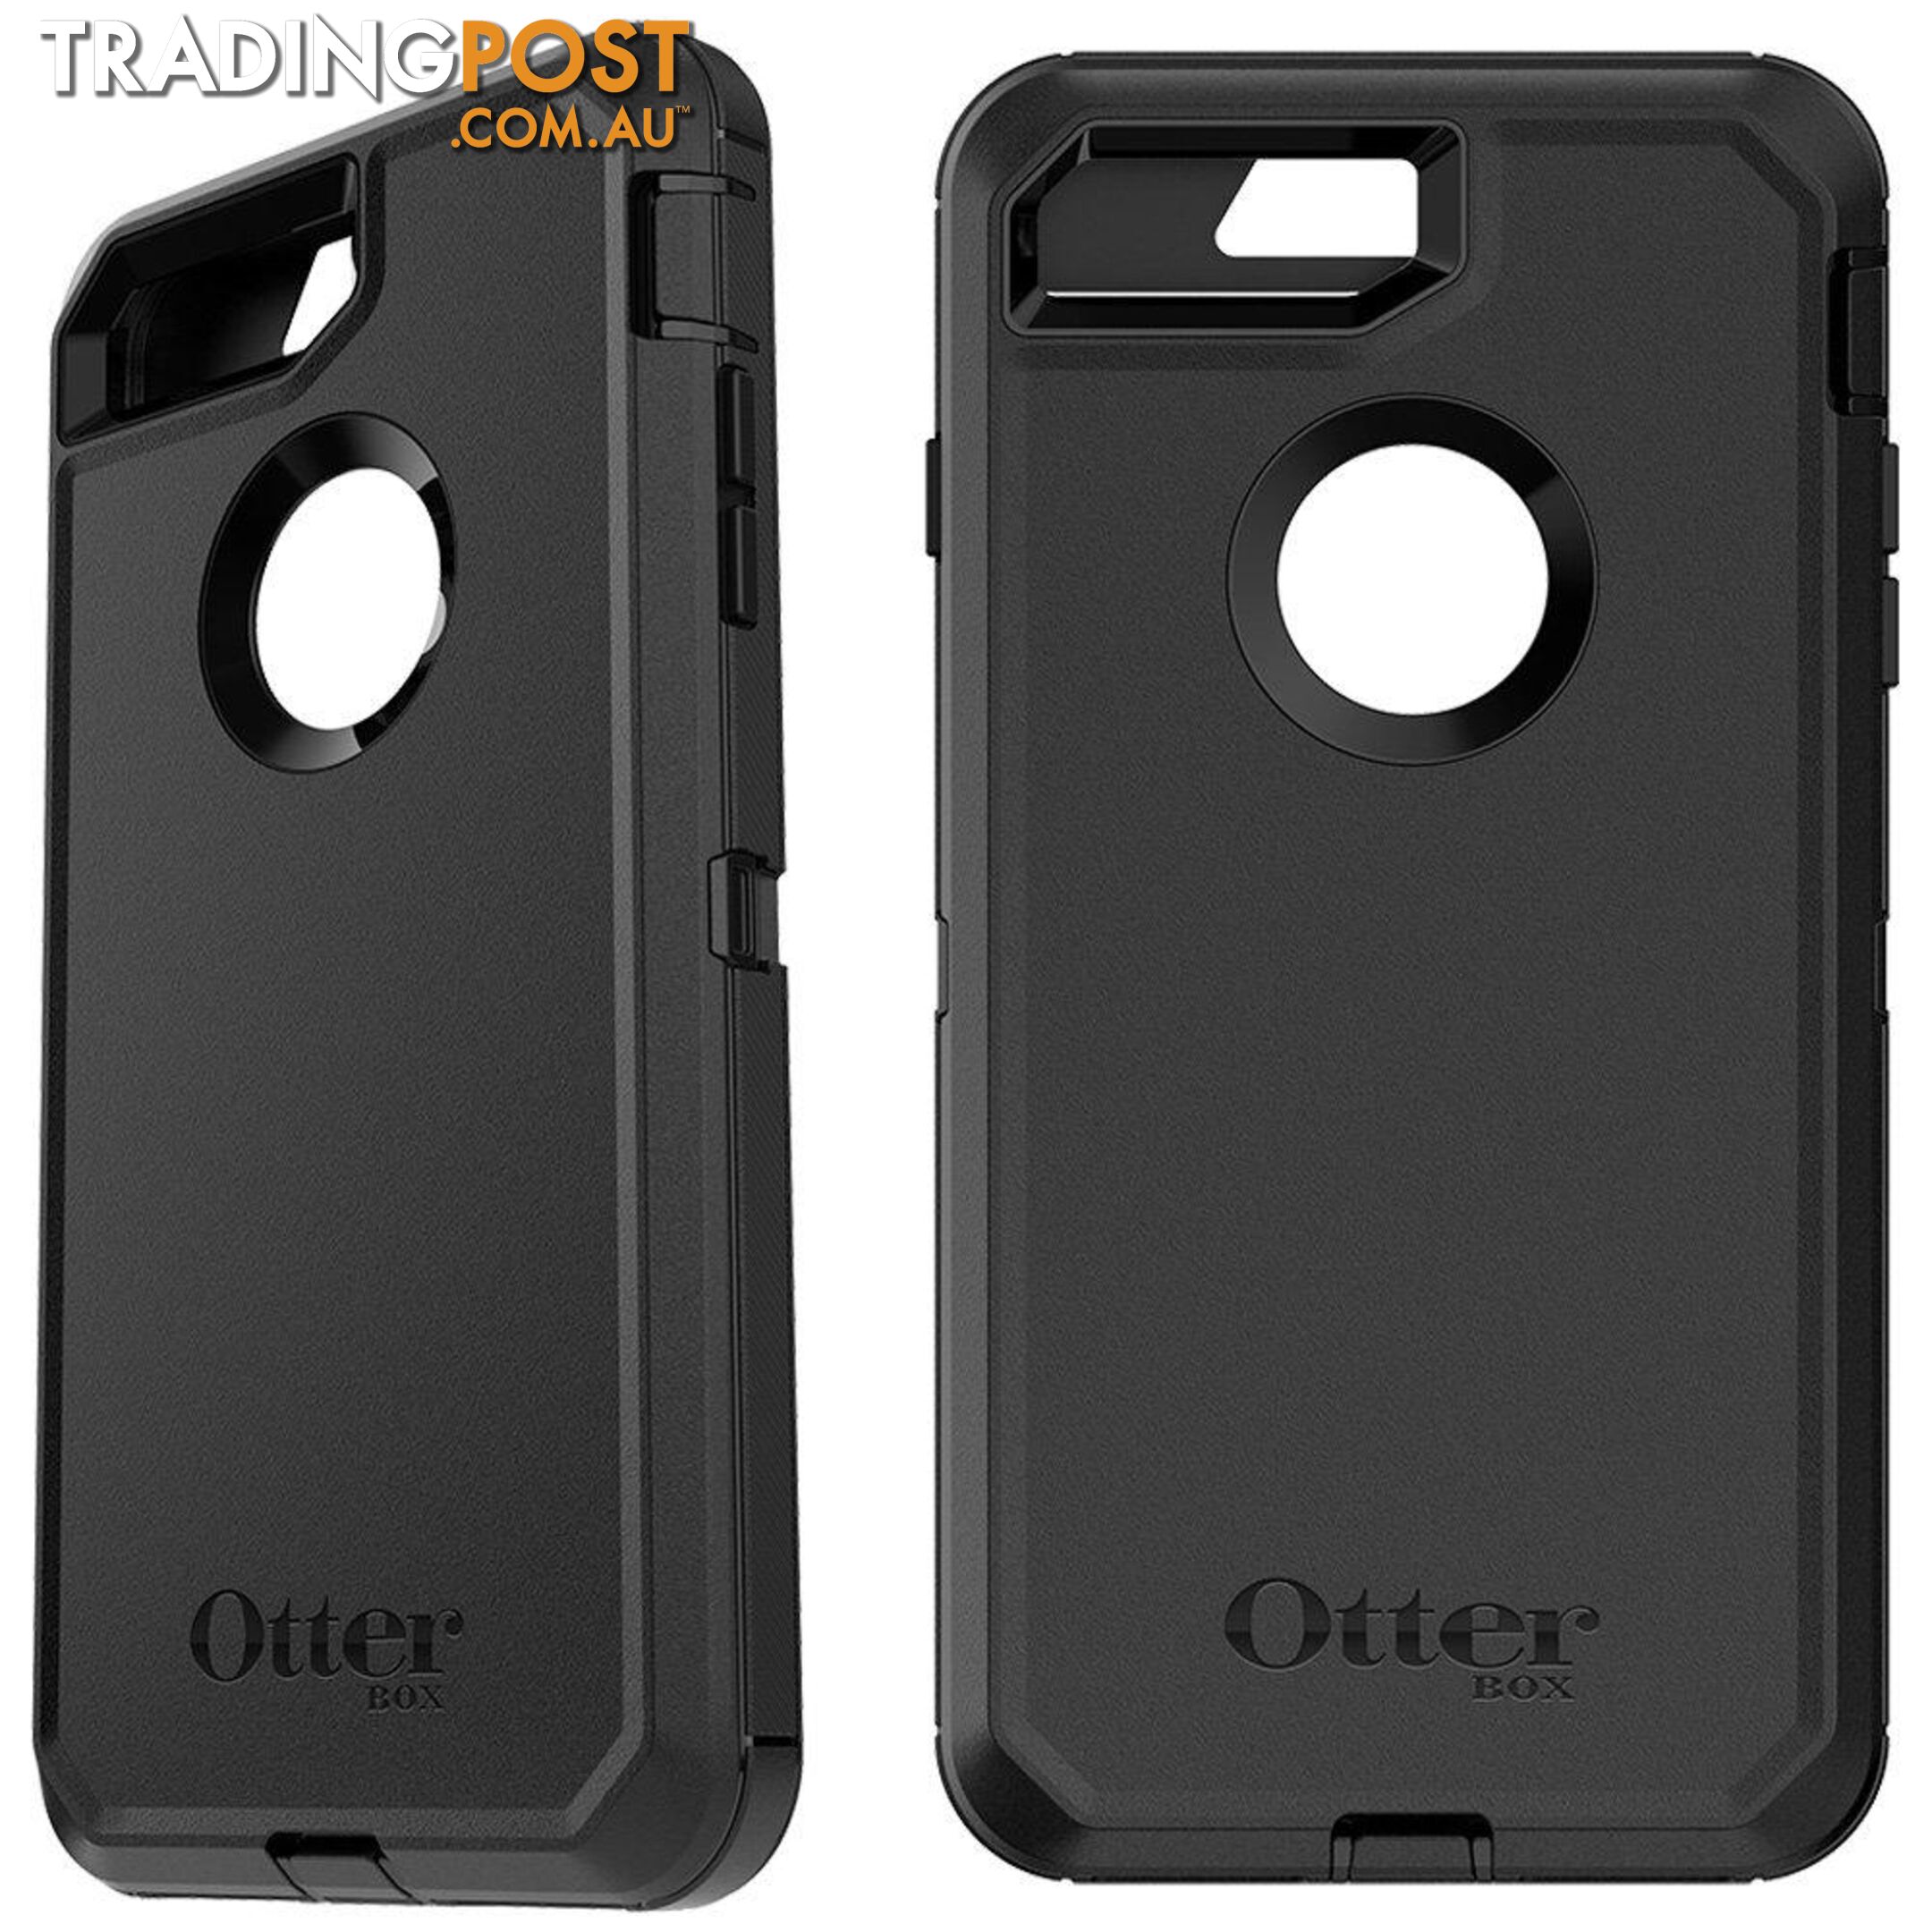 OtterBox Defender Case For iPhones - 1001800 - Cases